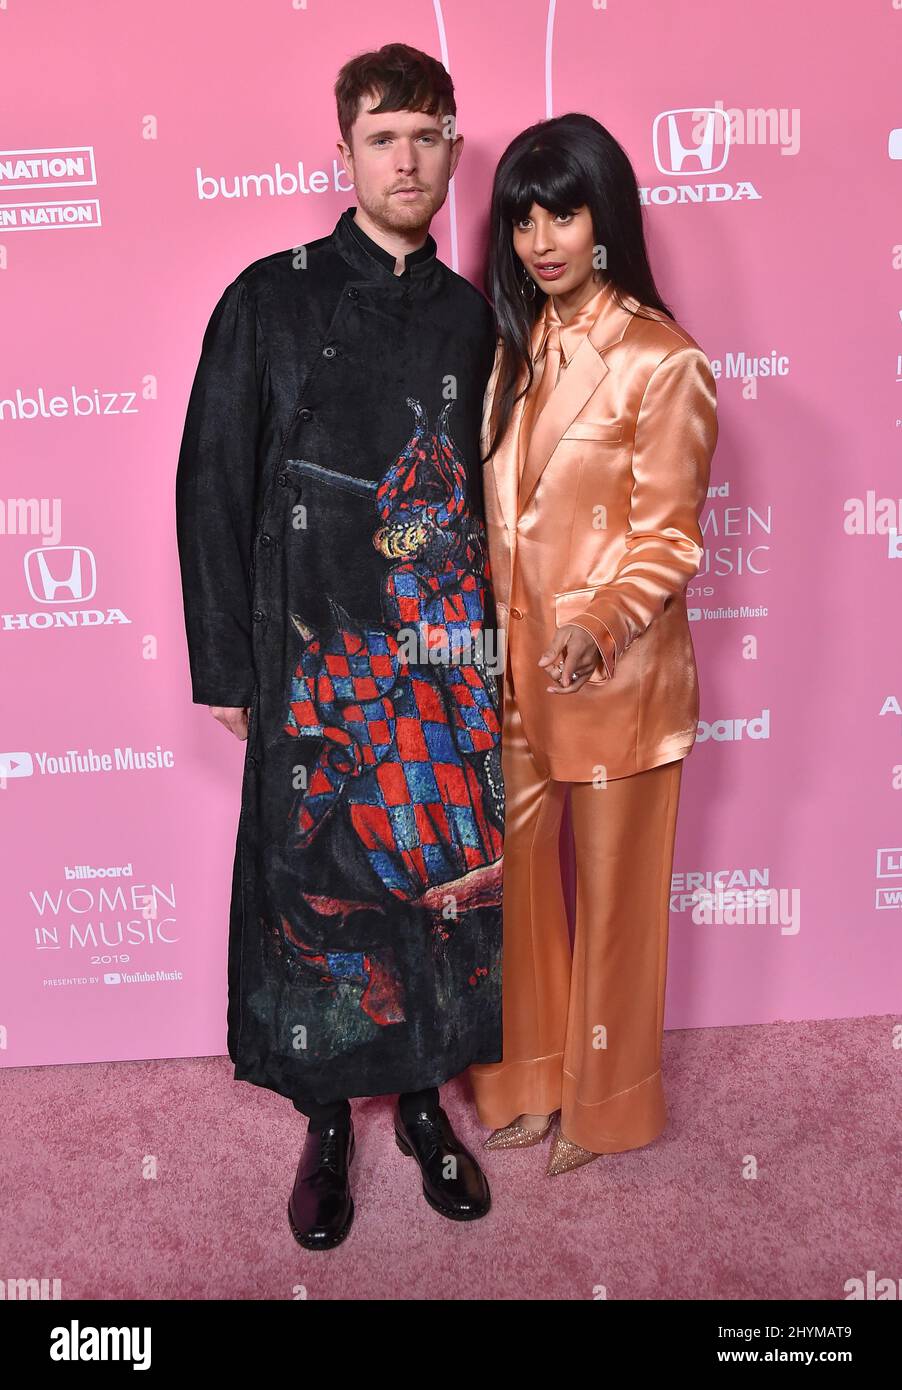 James Blake and Jameela Jamil attending the Billboard's Women In Music 2019 event in Hollywood, USA on Thursday December 13, 2019. Stock Photo